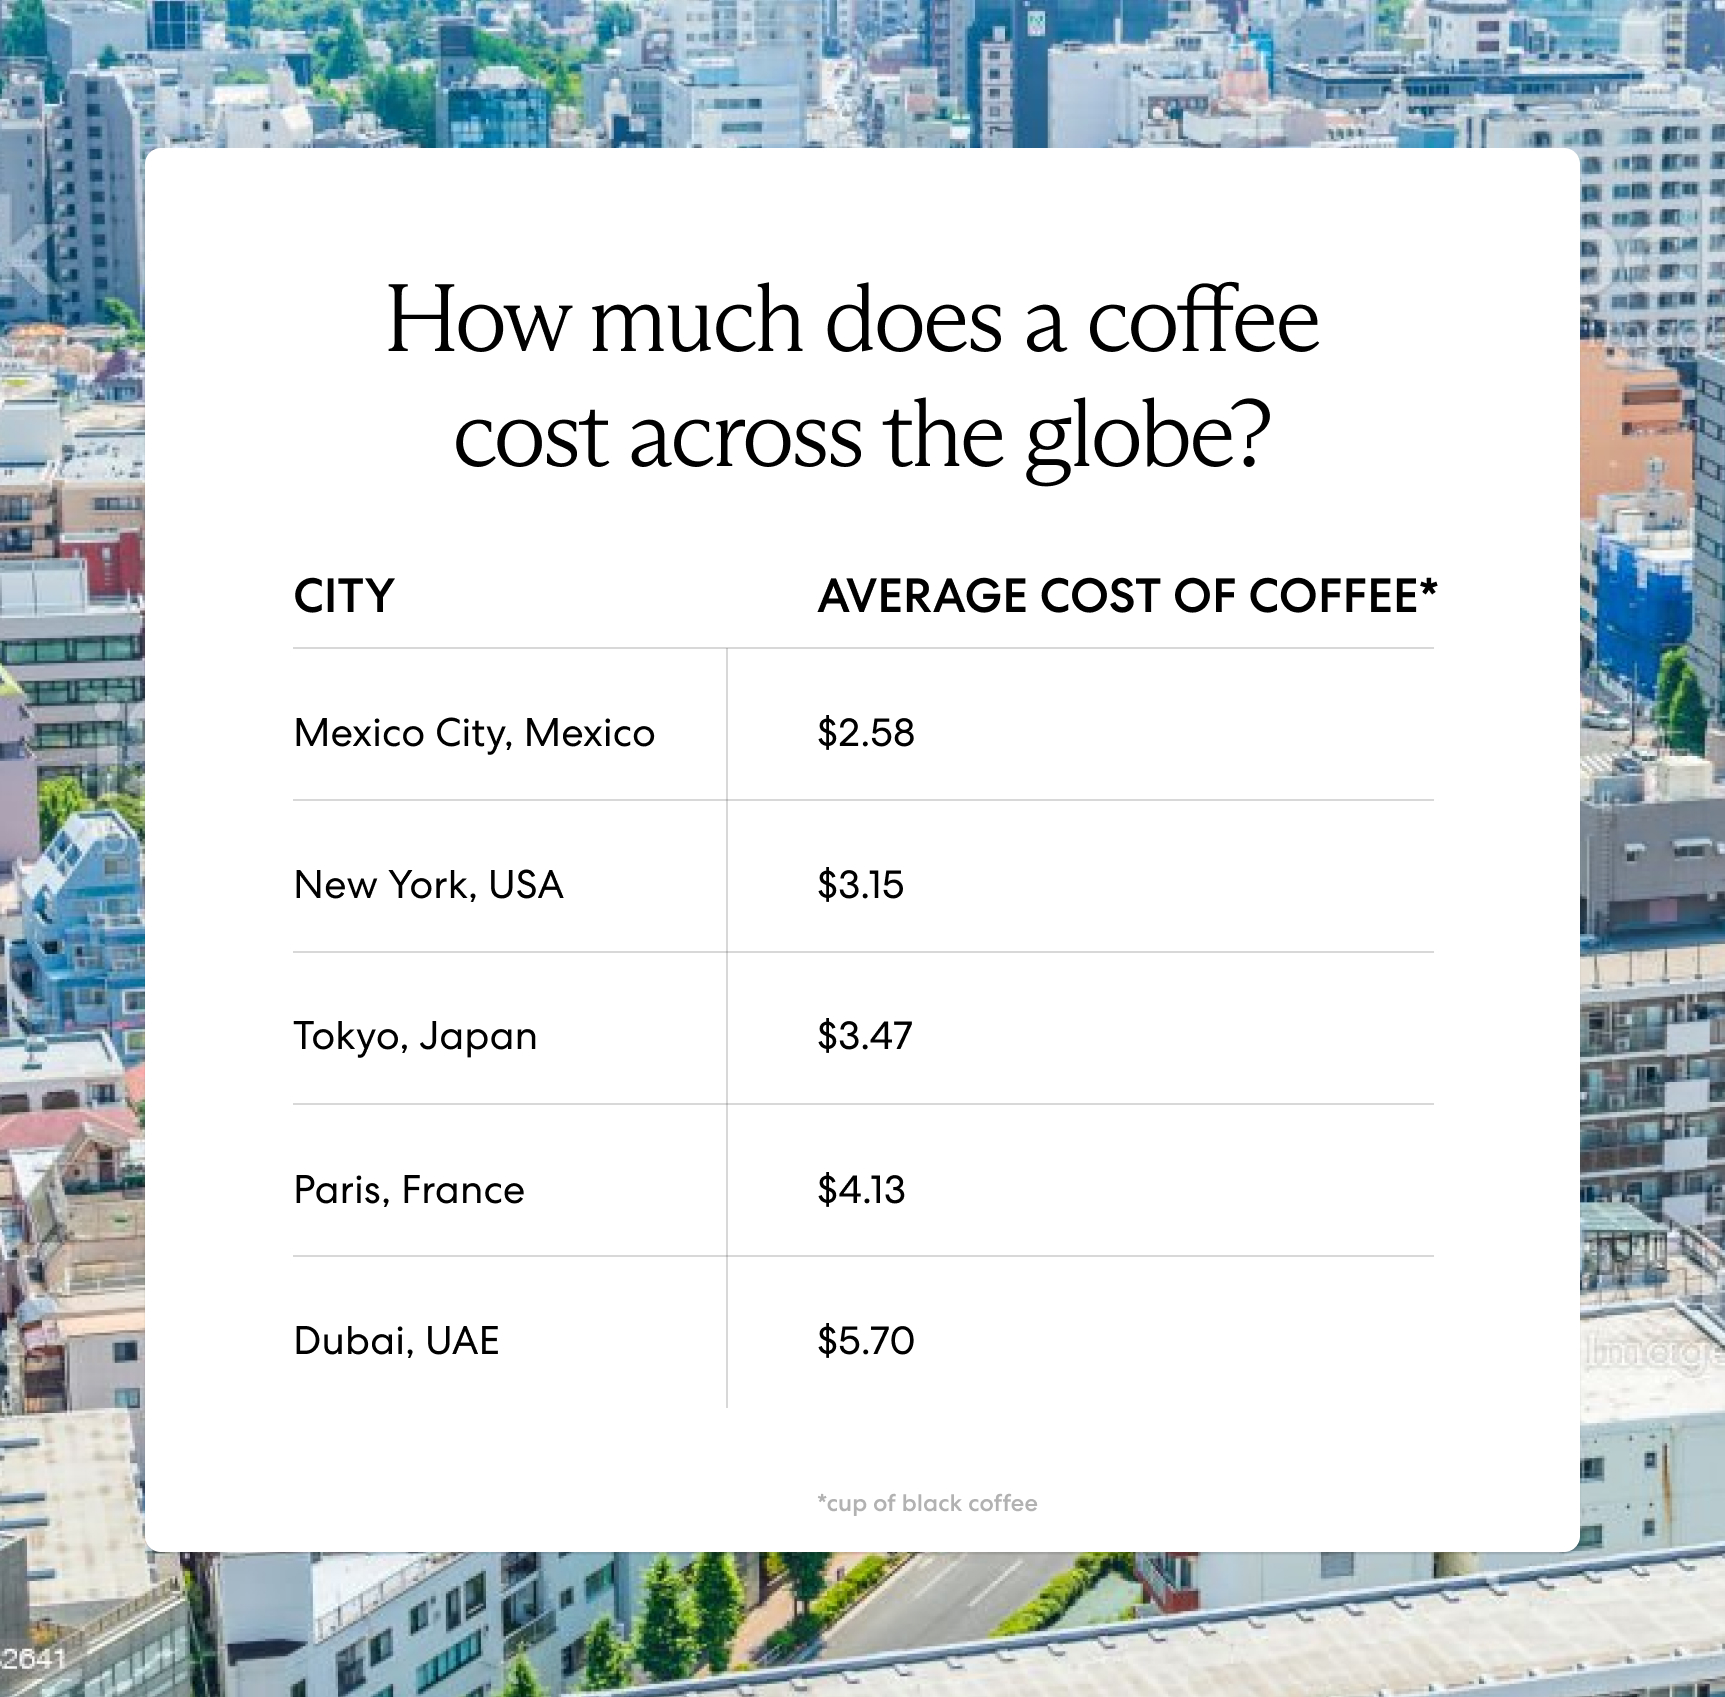 Illustrating the variance of the cost of coffee in major cities